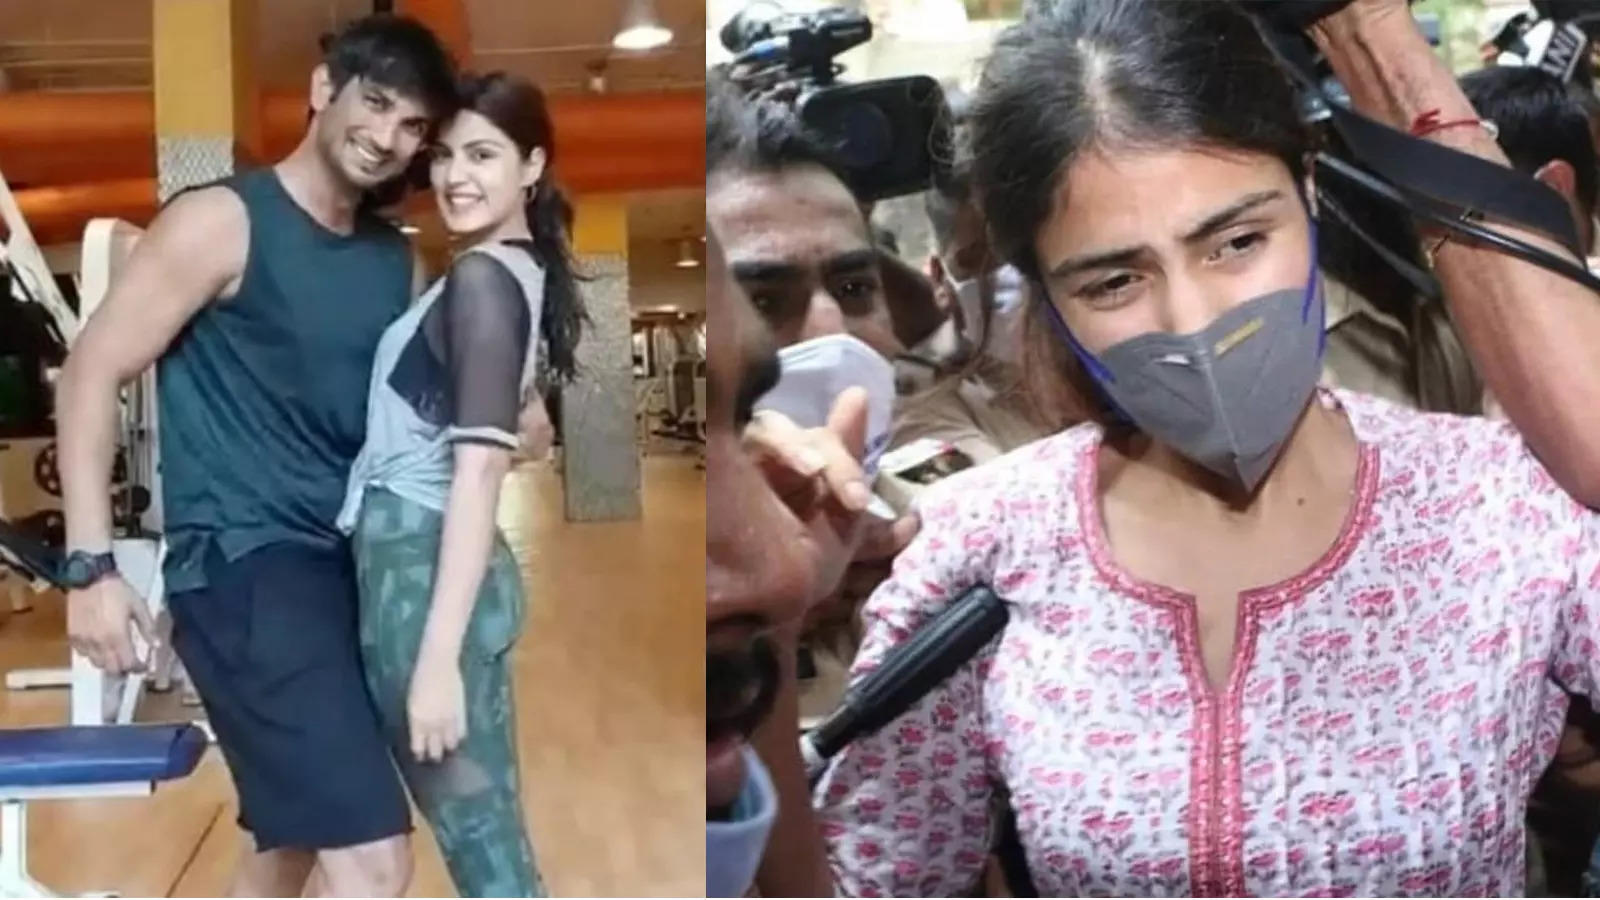 Drugs case in connection with Sushant Singh Rajput’s death: NCB charges Rhea Chakraborty with receiving, paying for ganja | Hindi Movie News – Bollywood